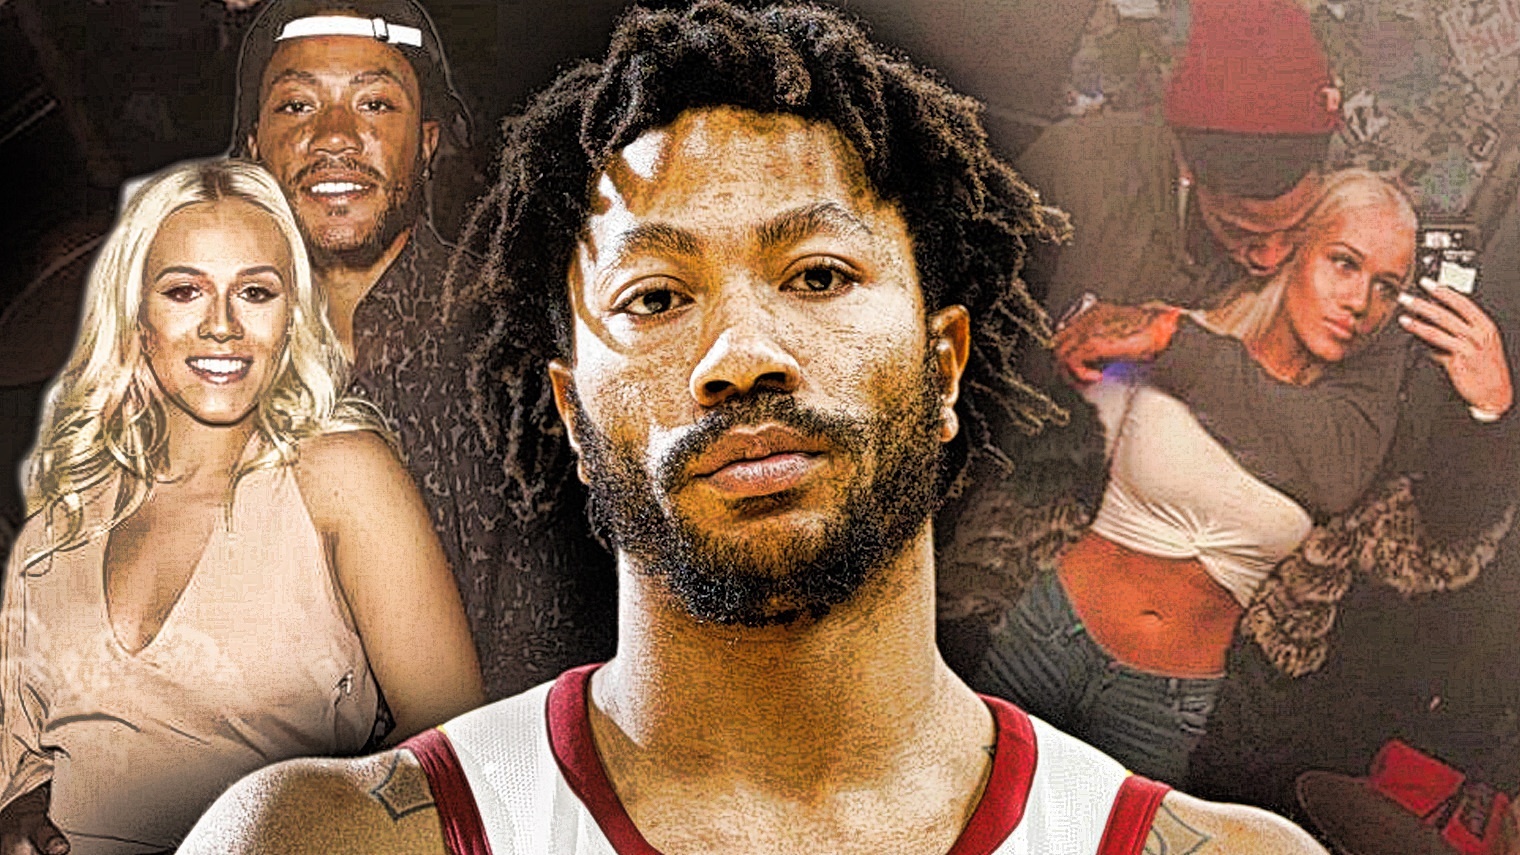 Cavs rumors: Derrick Rose got married during personal leave of absence1520 x 855